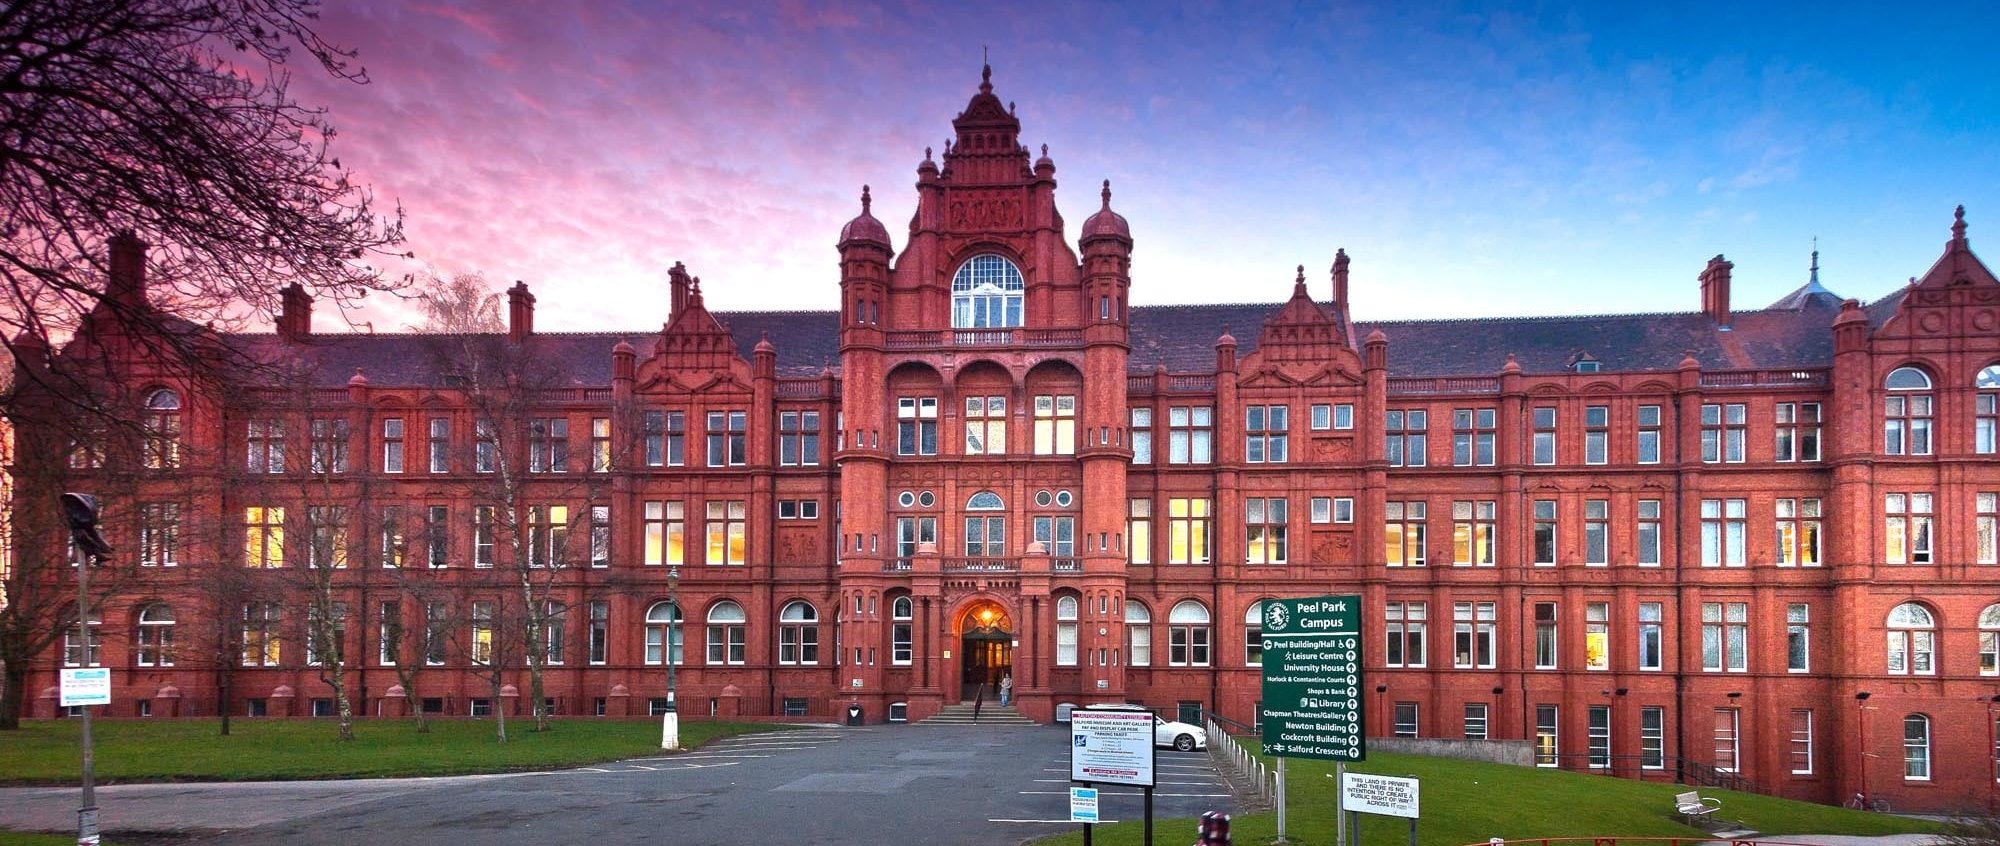 University of Salford SCL